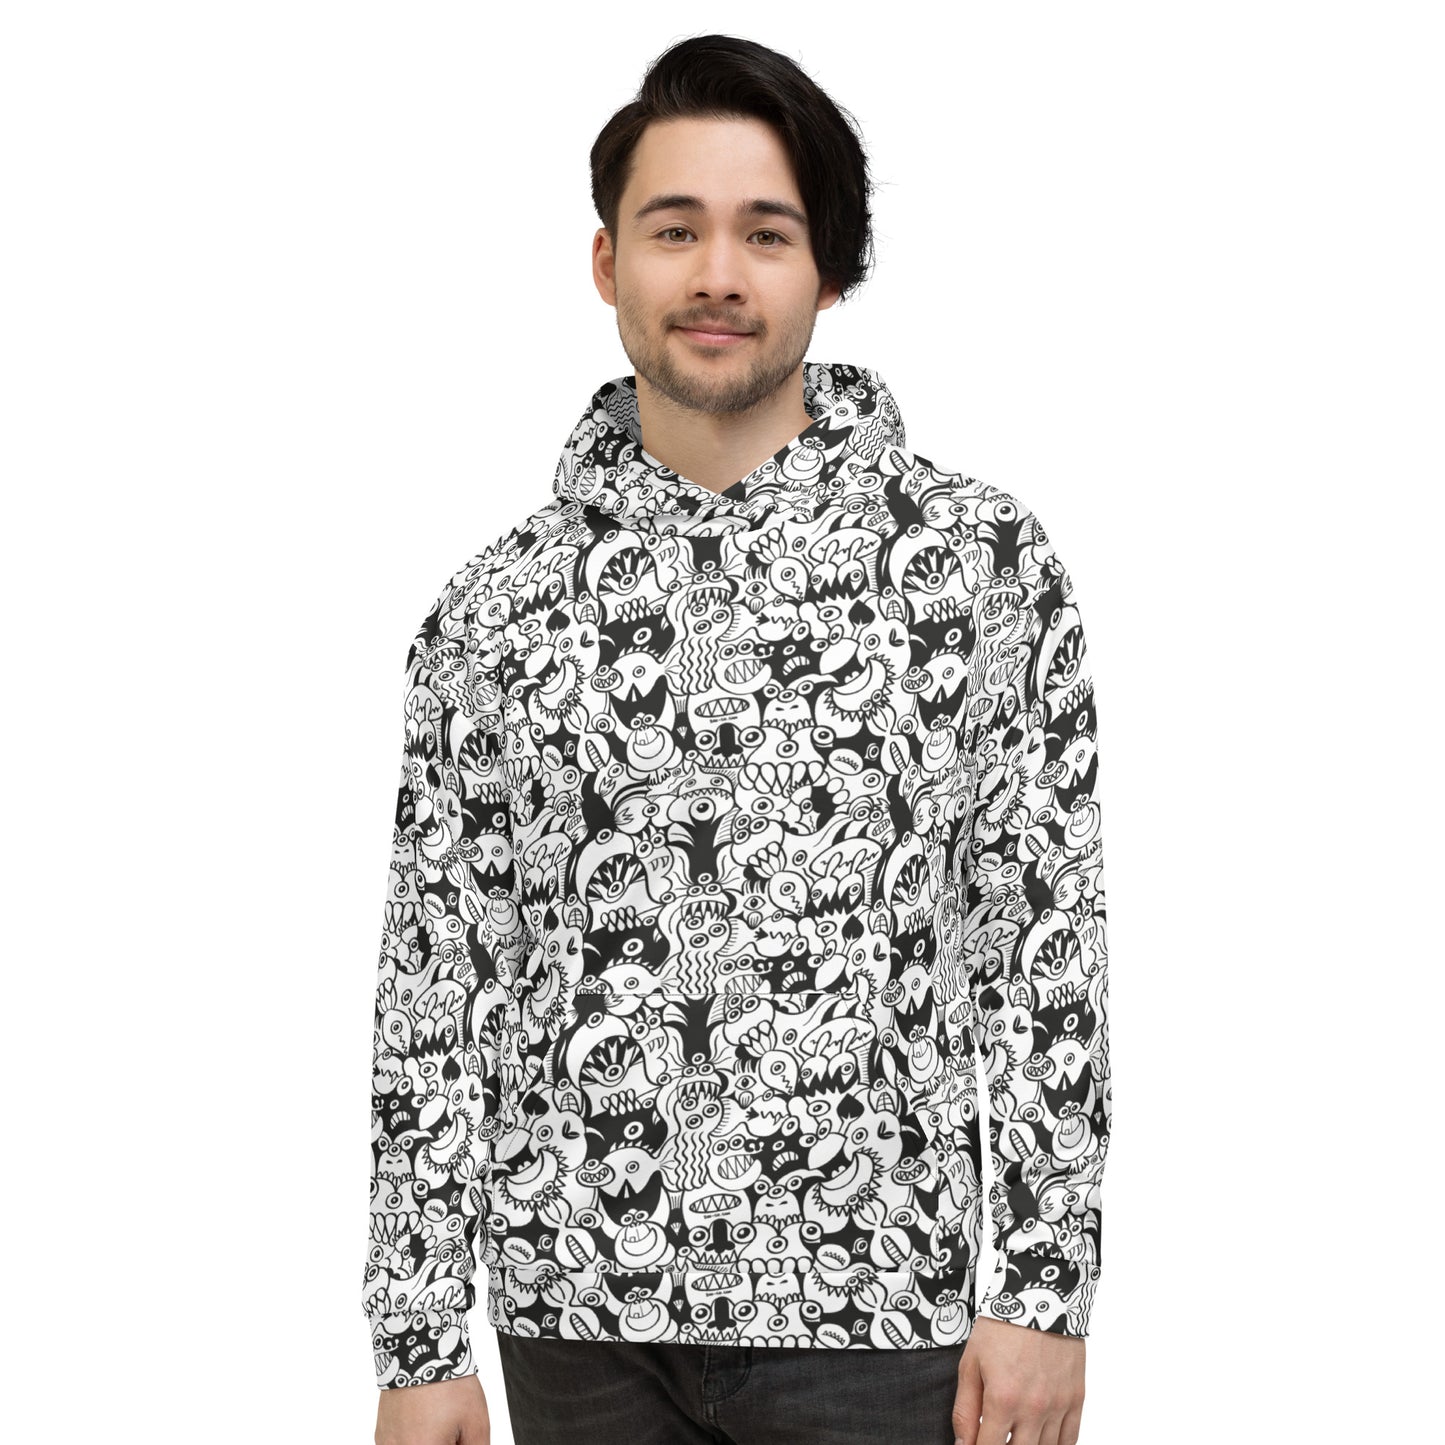 Young man wearing Unisex Hoodie All over printed with Black and white cool doodles art